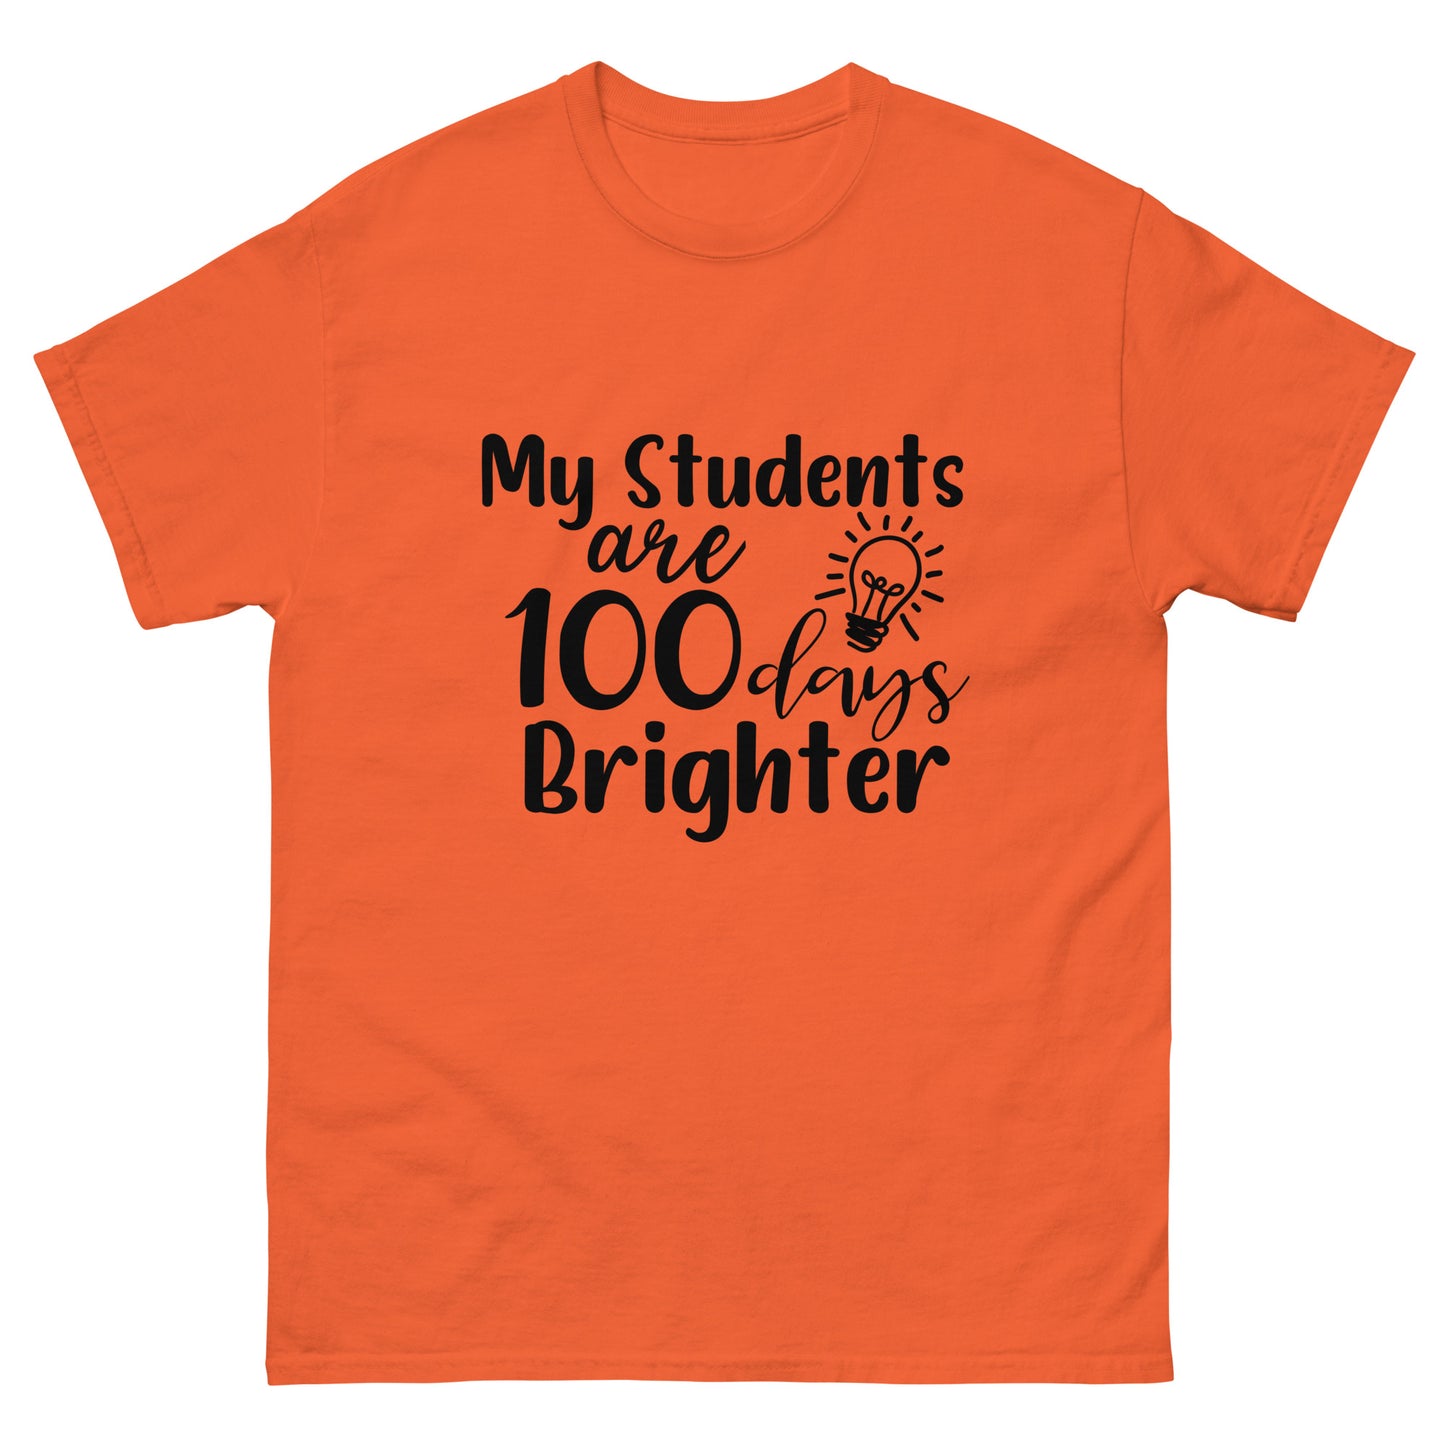 My Student's are 100 days brighter - Teacher - classic tee